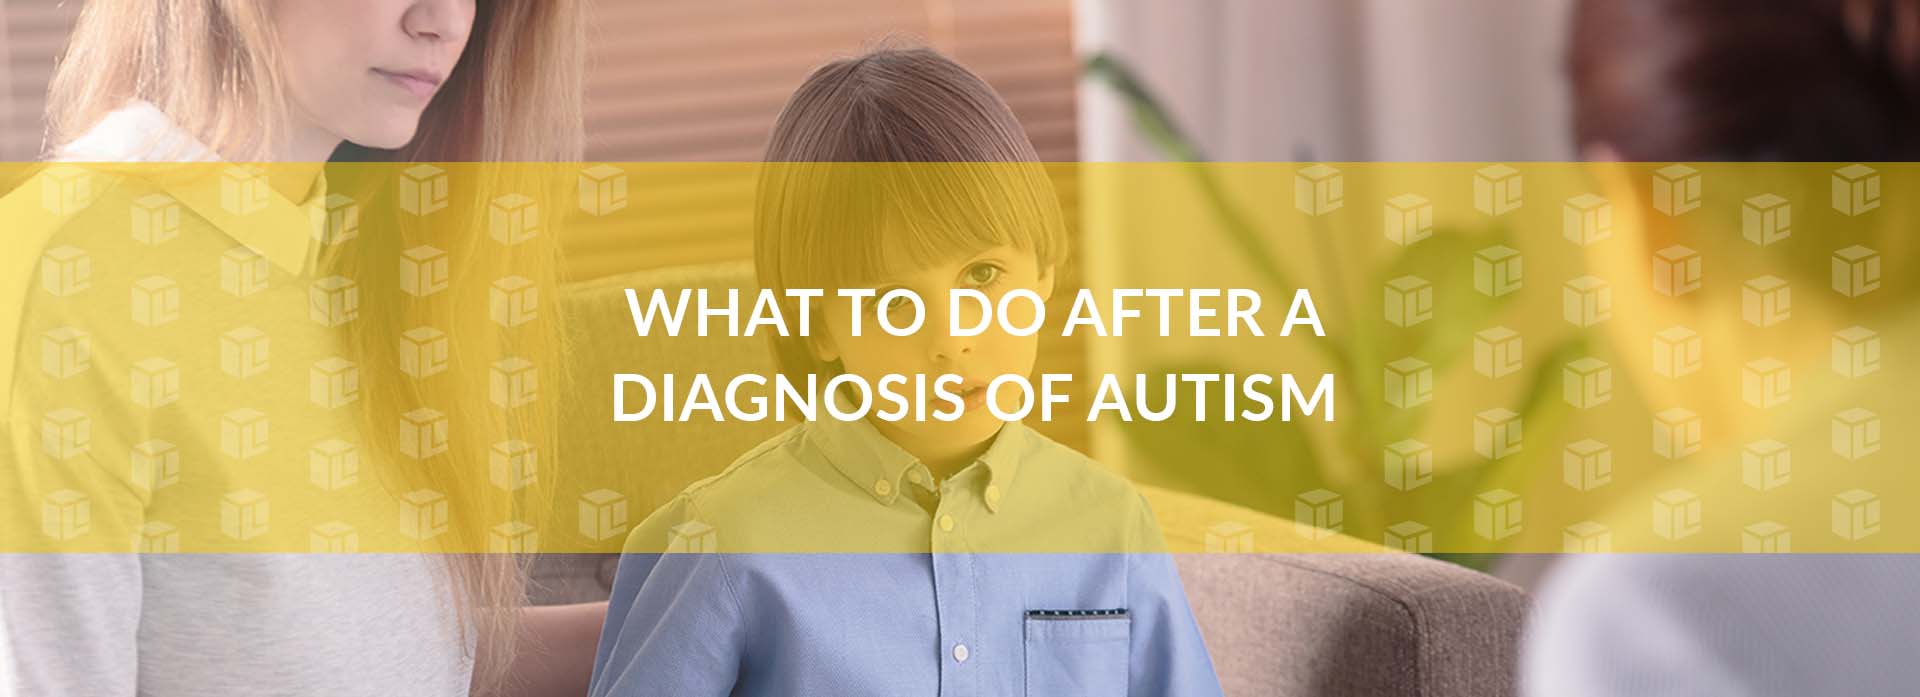 What To Do After A Diagnosis Of Autism